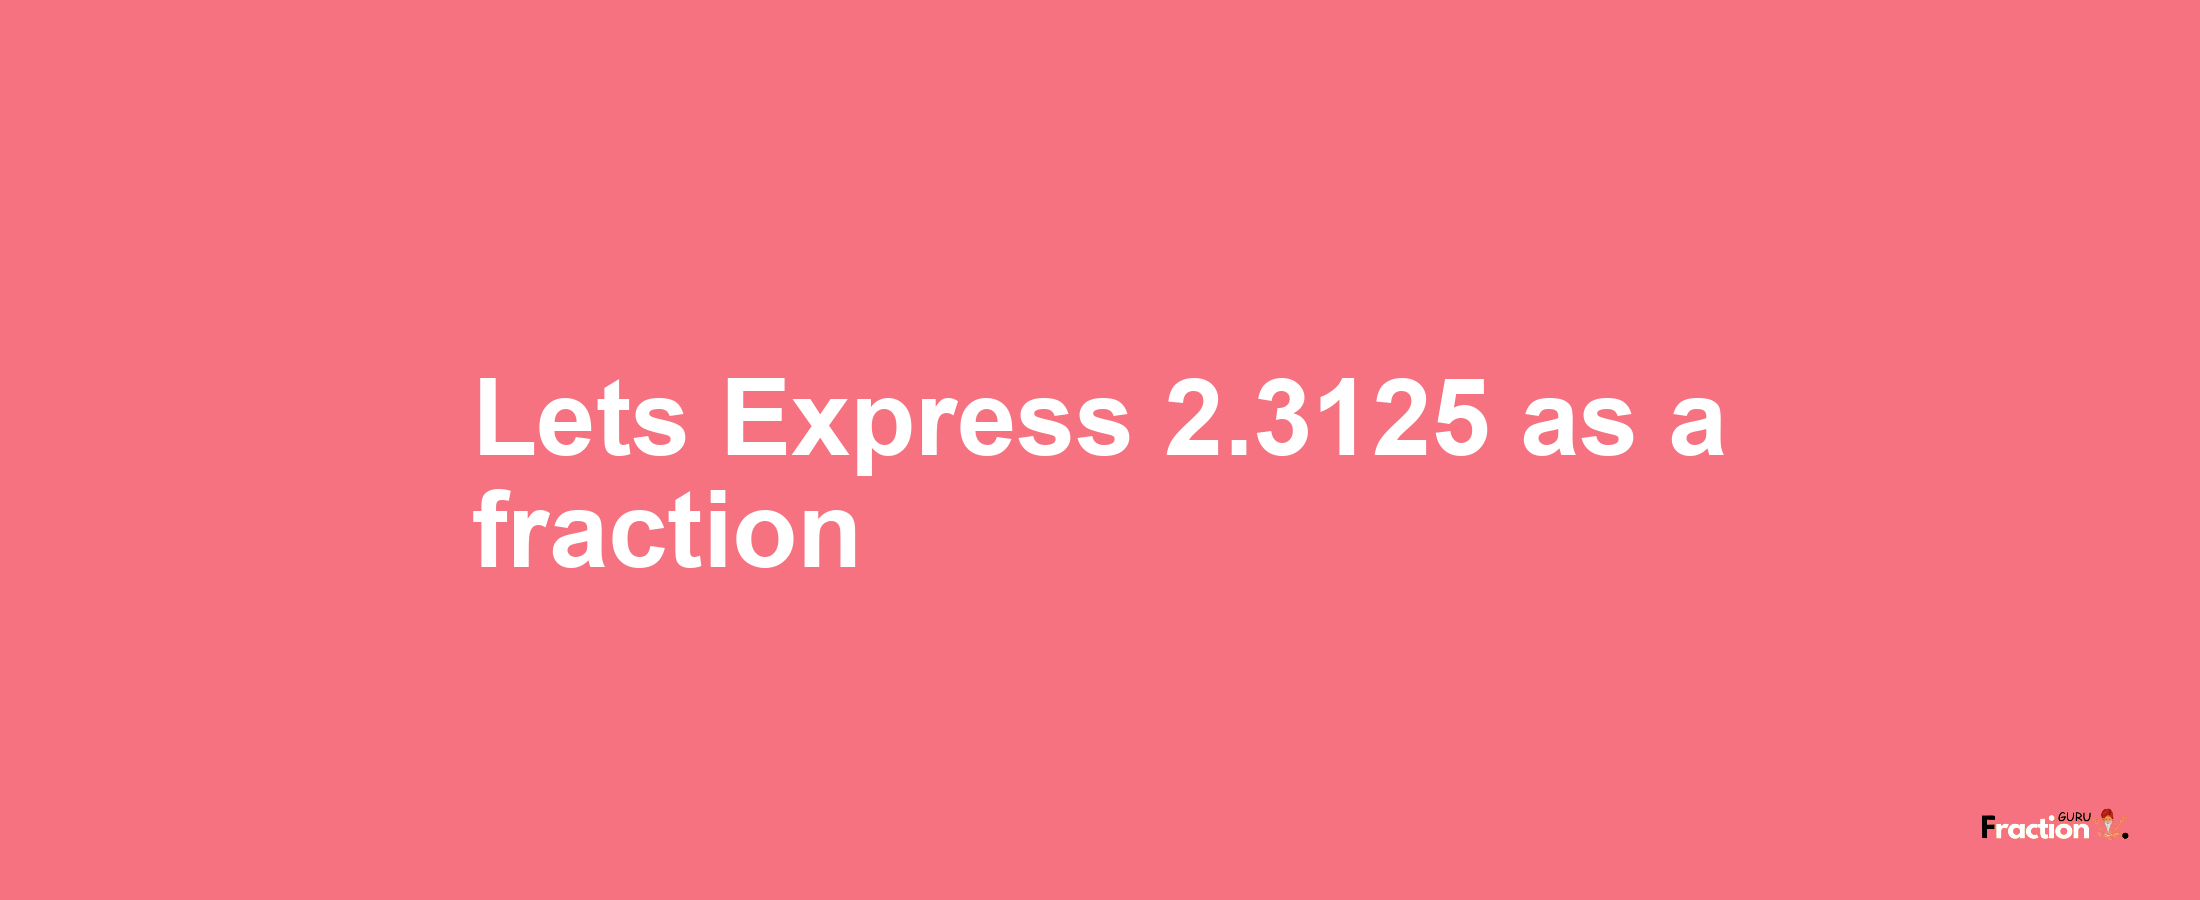 Lets Express 2.3125 as afraction